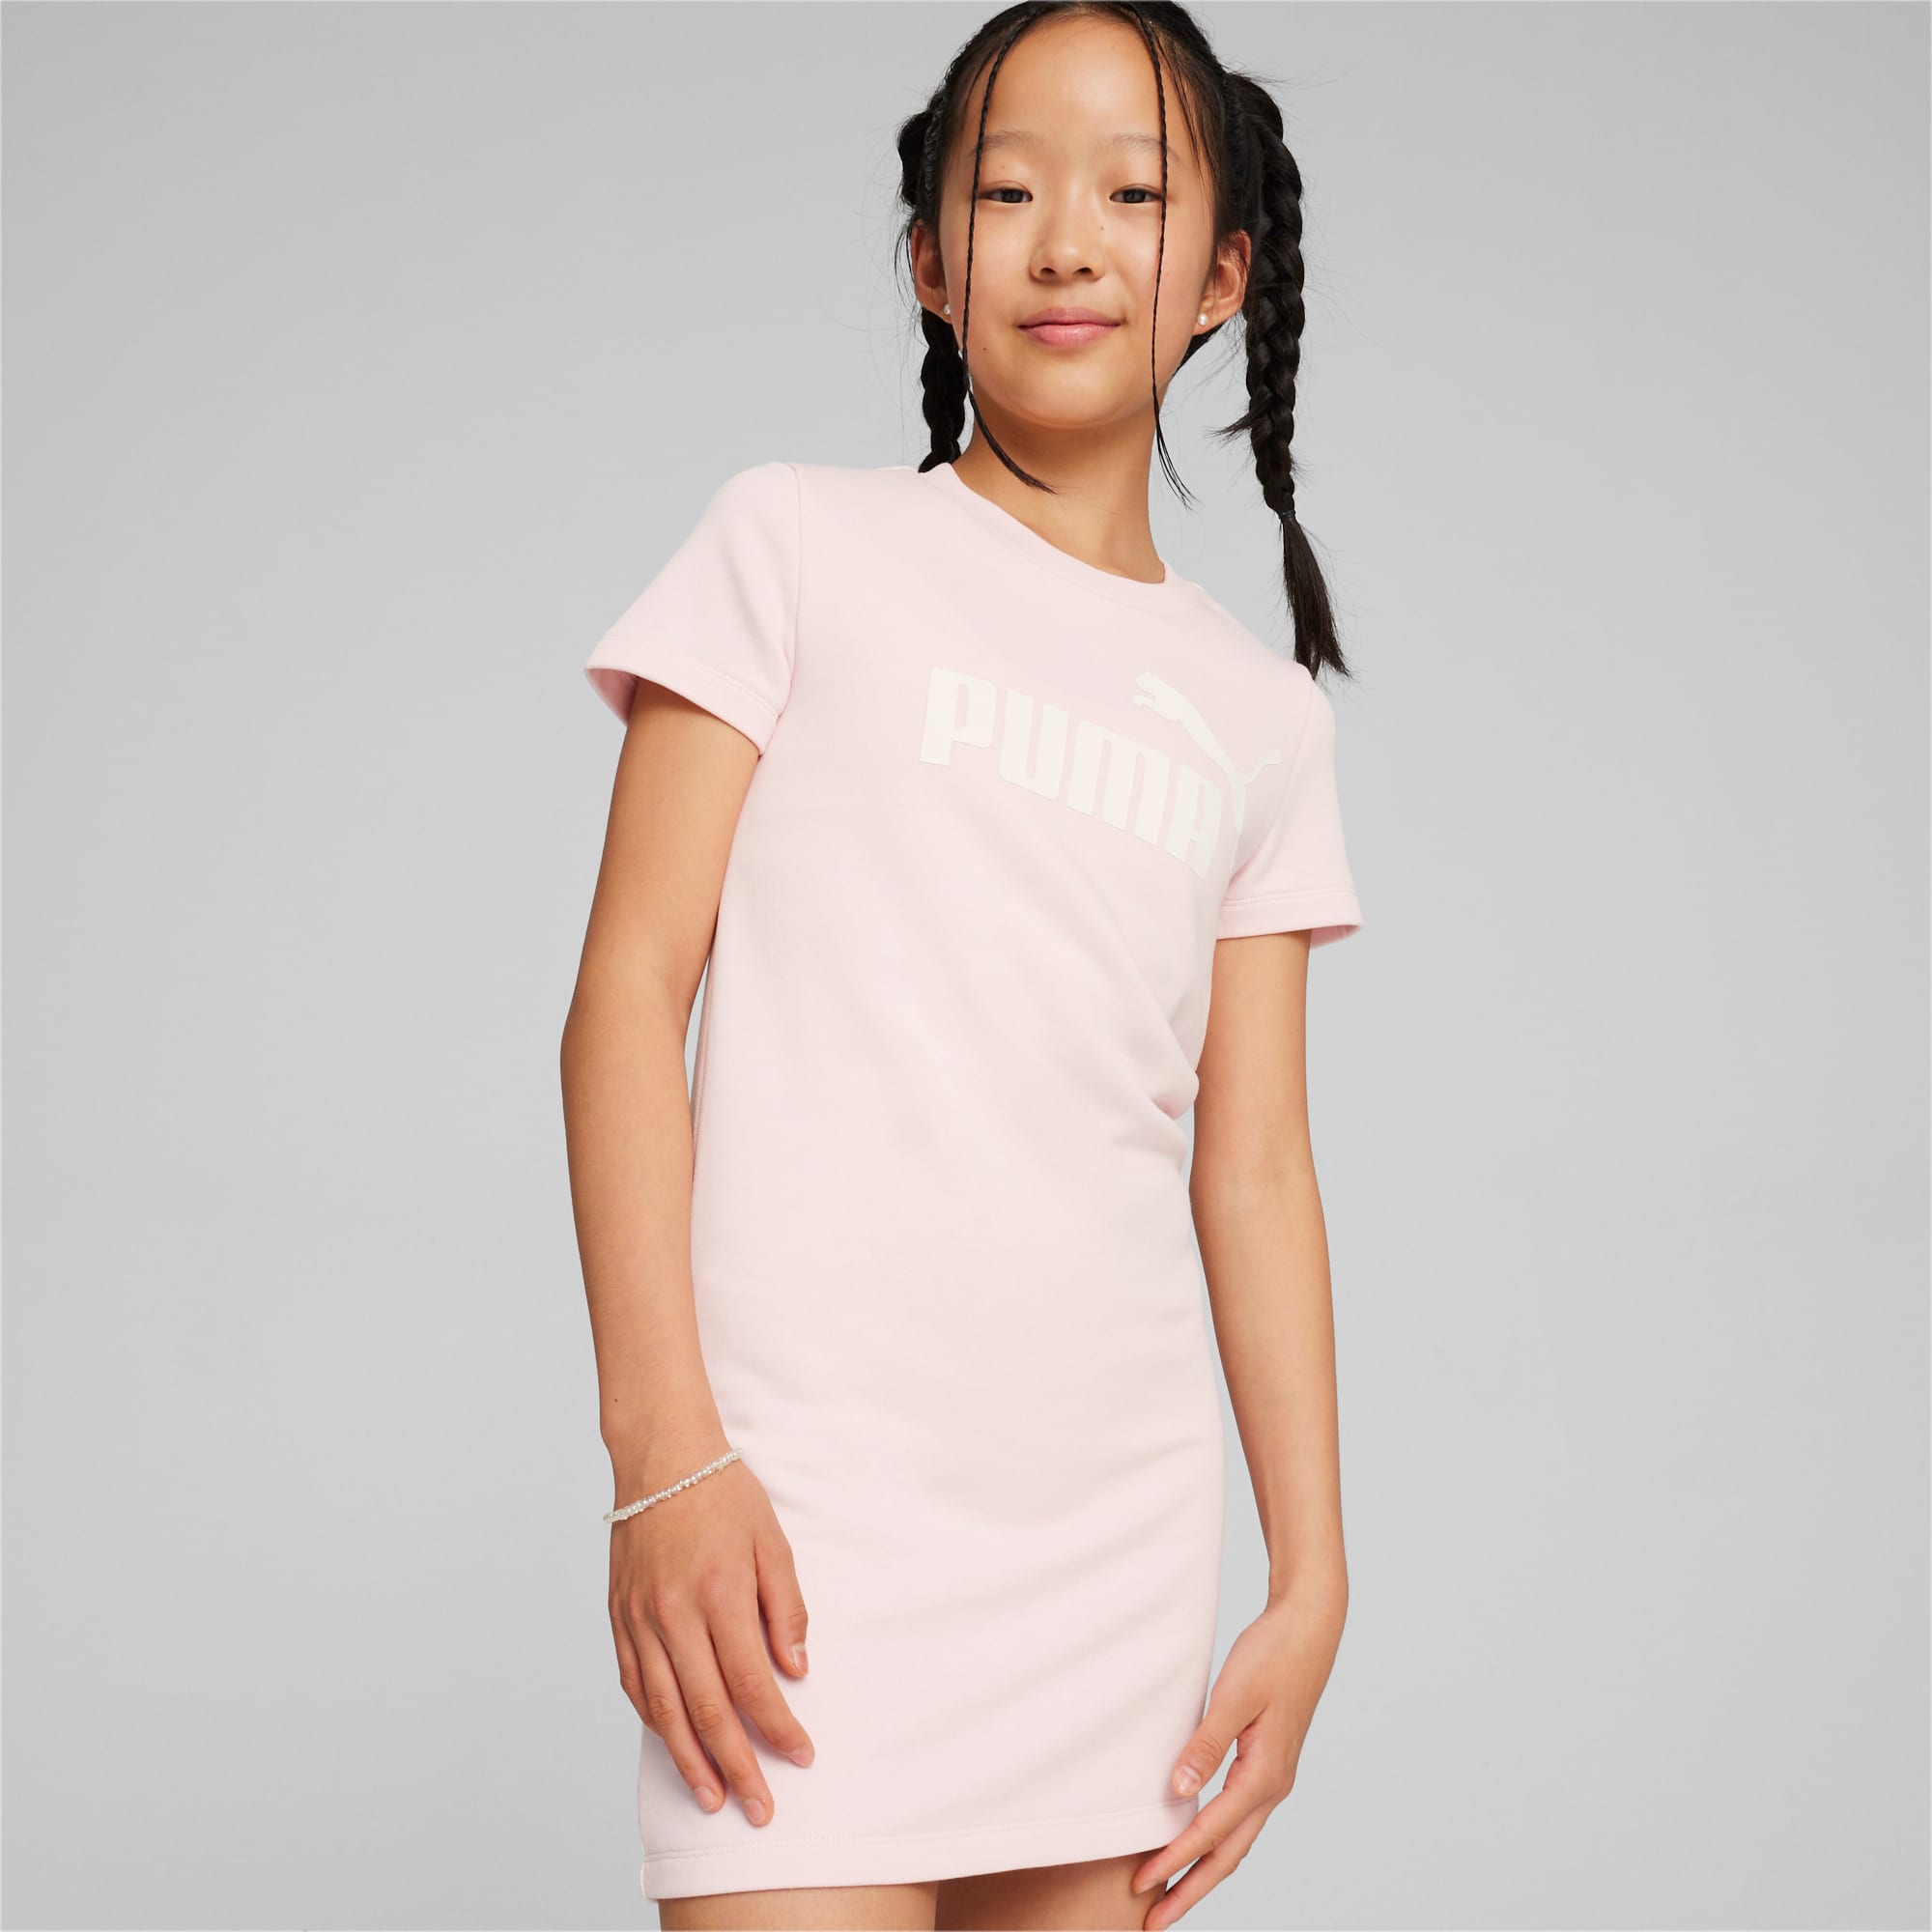 PUMA Essentials+ Logo Dress Youth, Whisp Of Pink, Size 164